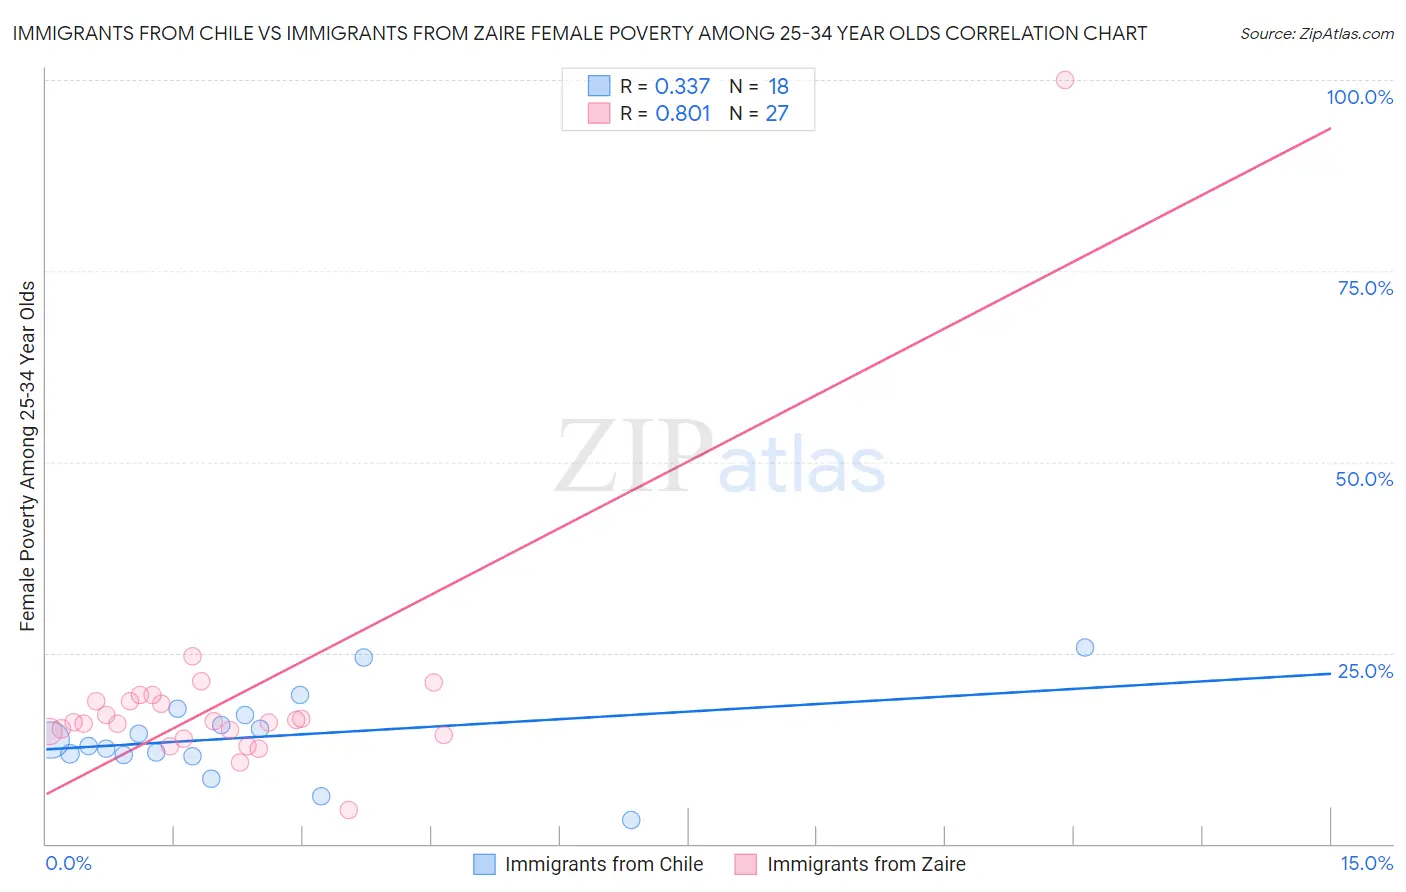 Immigrants from Chile vs Immigrants from Zaire Female Poverty Among 25-34 Year Olds